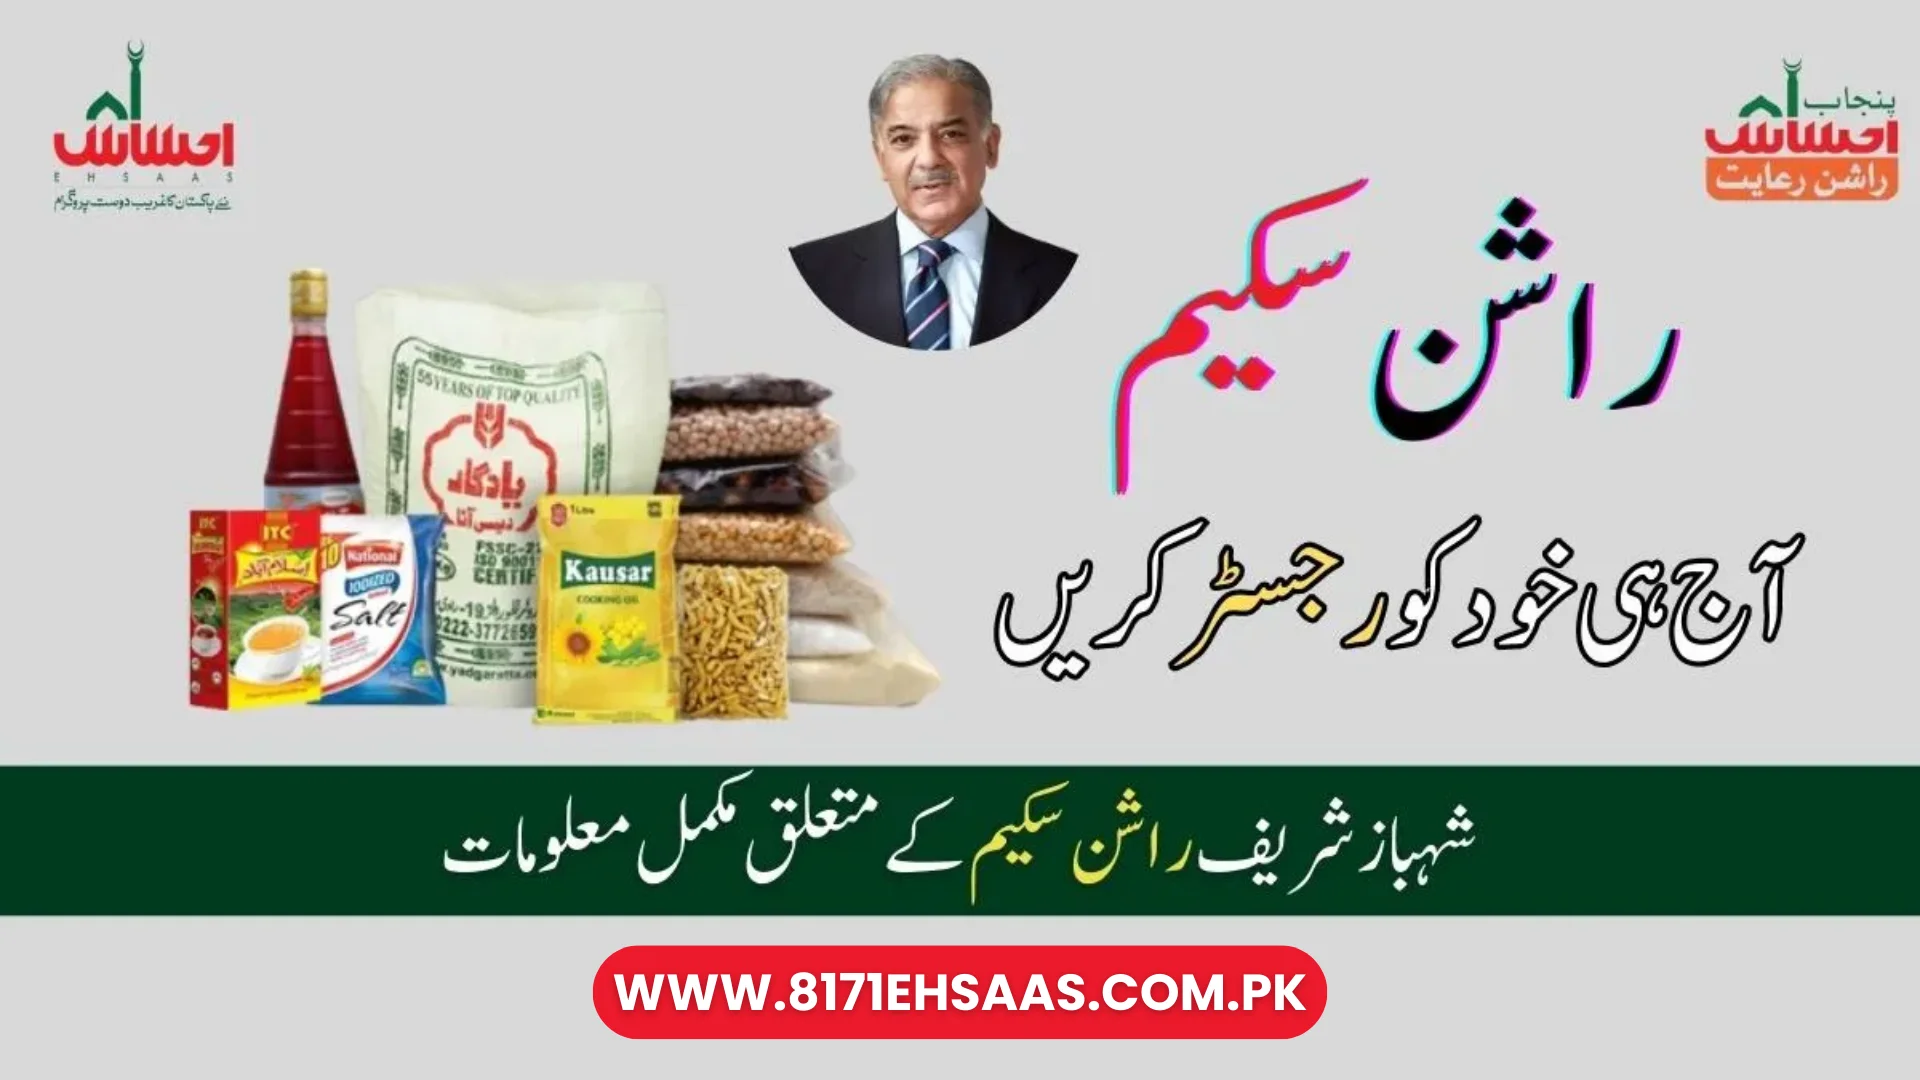 A Huge Relief for Rashan by PM Shehbaz Sharif